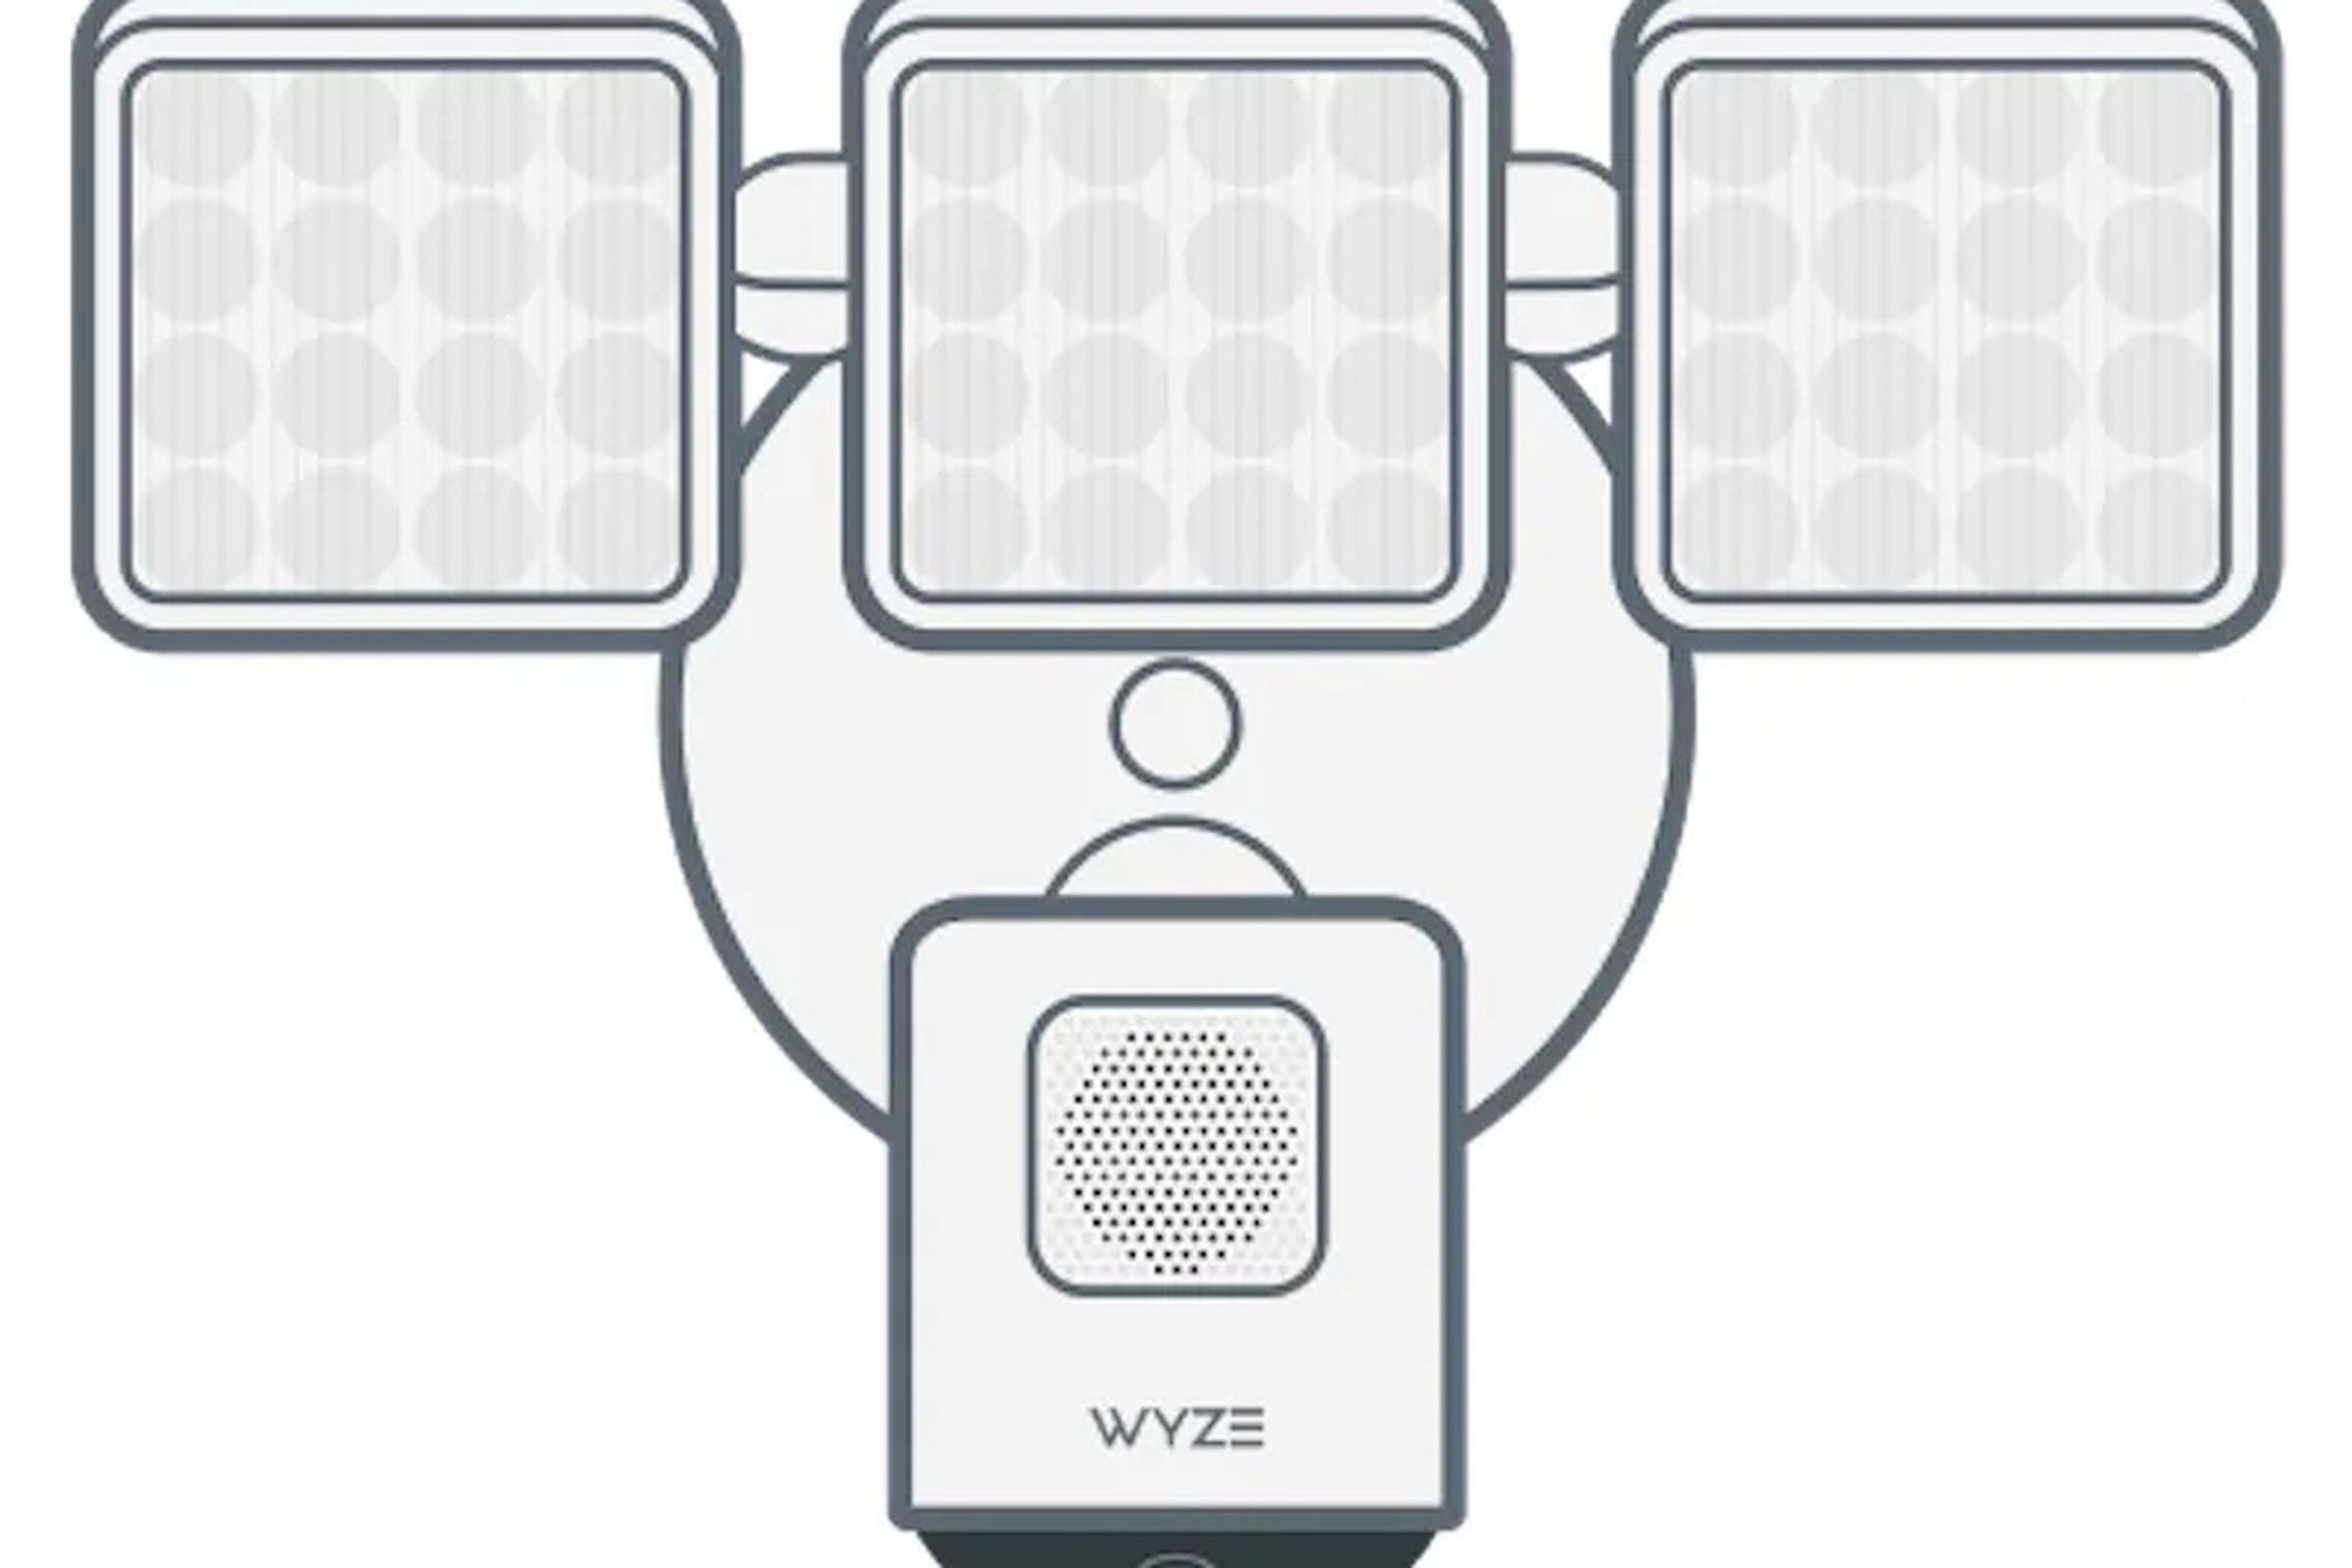 Two new Wyze cameras appear to be in the works